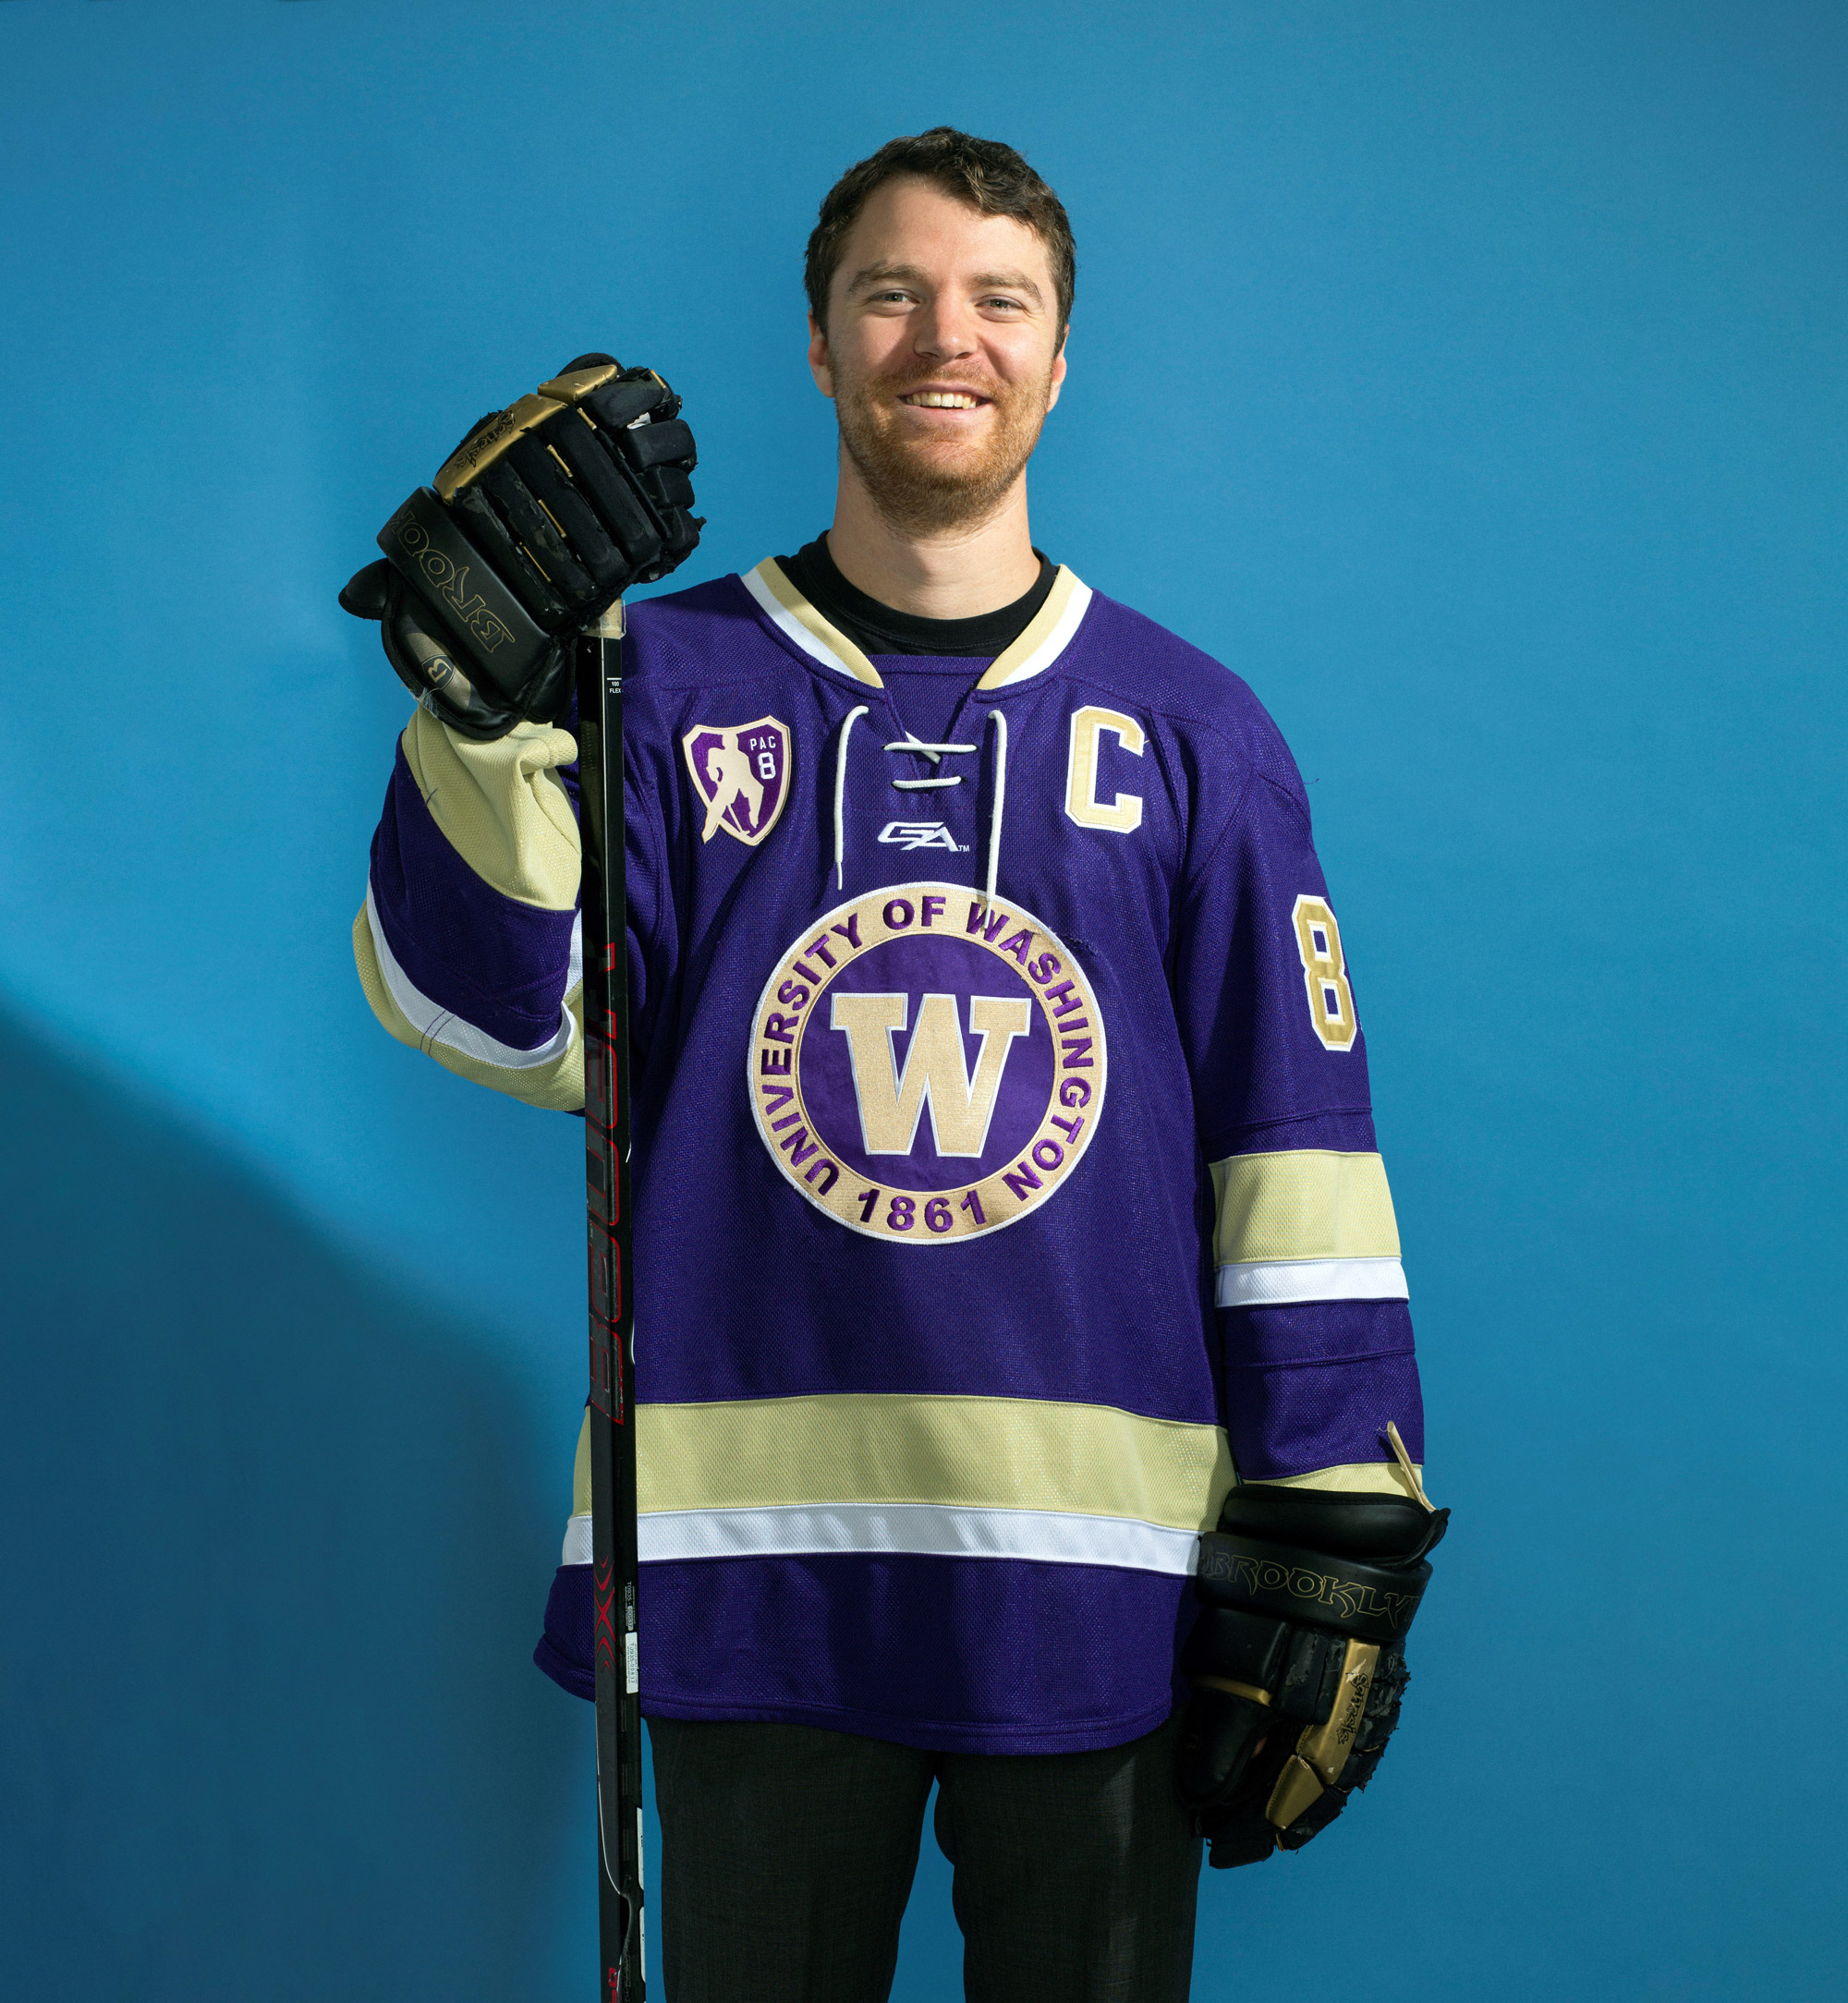 Ryan Minkoff smiles while wearing his UW Hockey Club uniform and holding a hockey stick